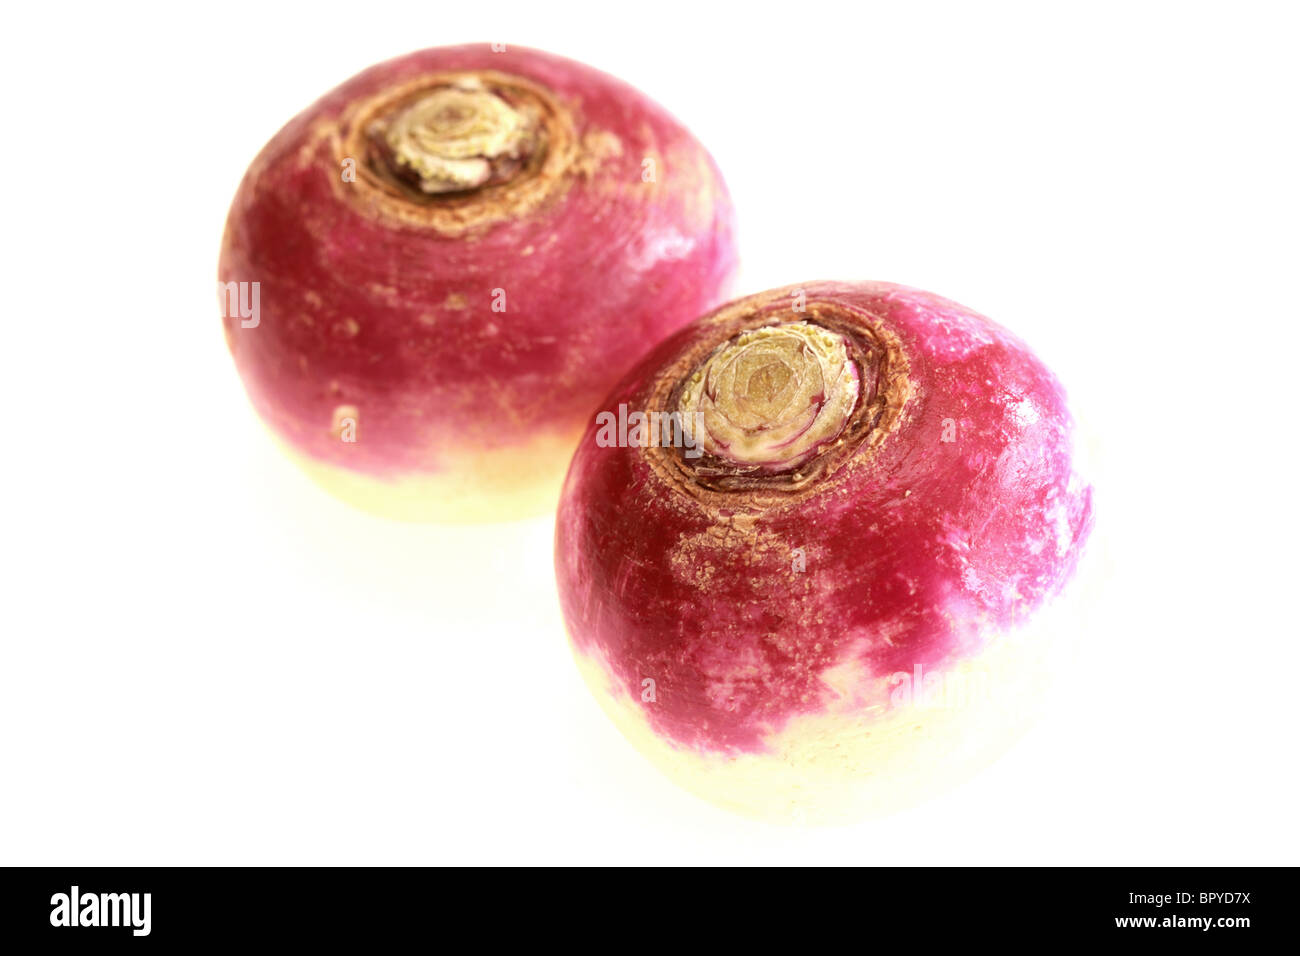 Fresh Healthy Raw Uncooked Turnips Against A White Background With A Clipping Path And No People Stock Photo